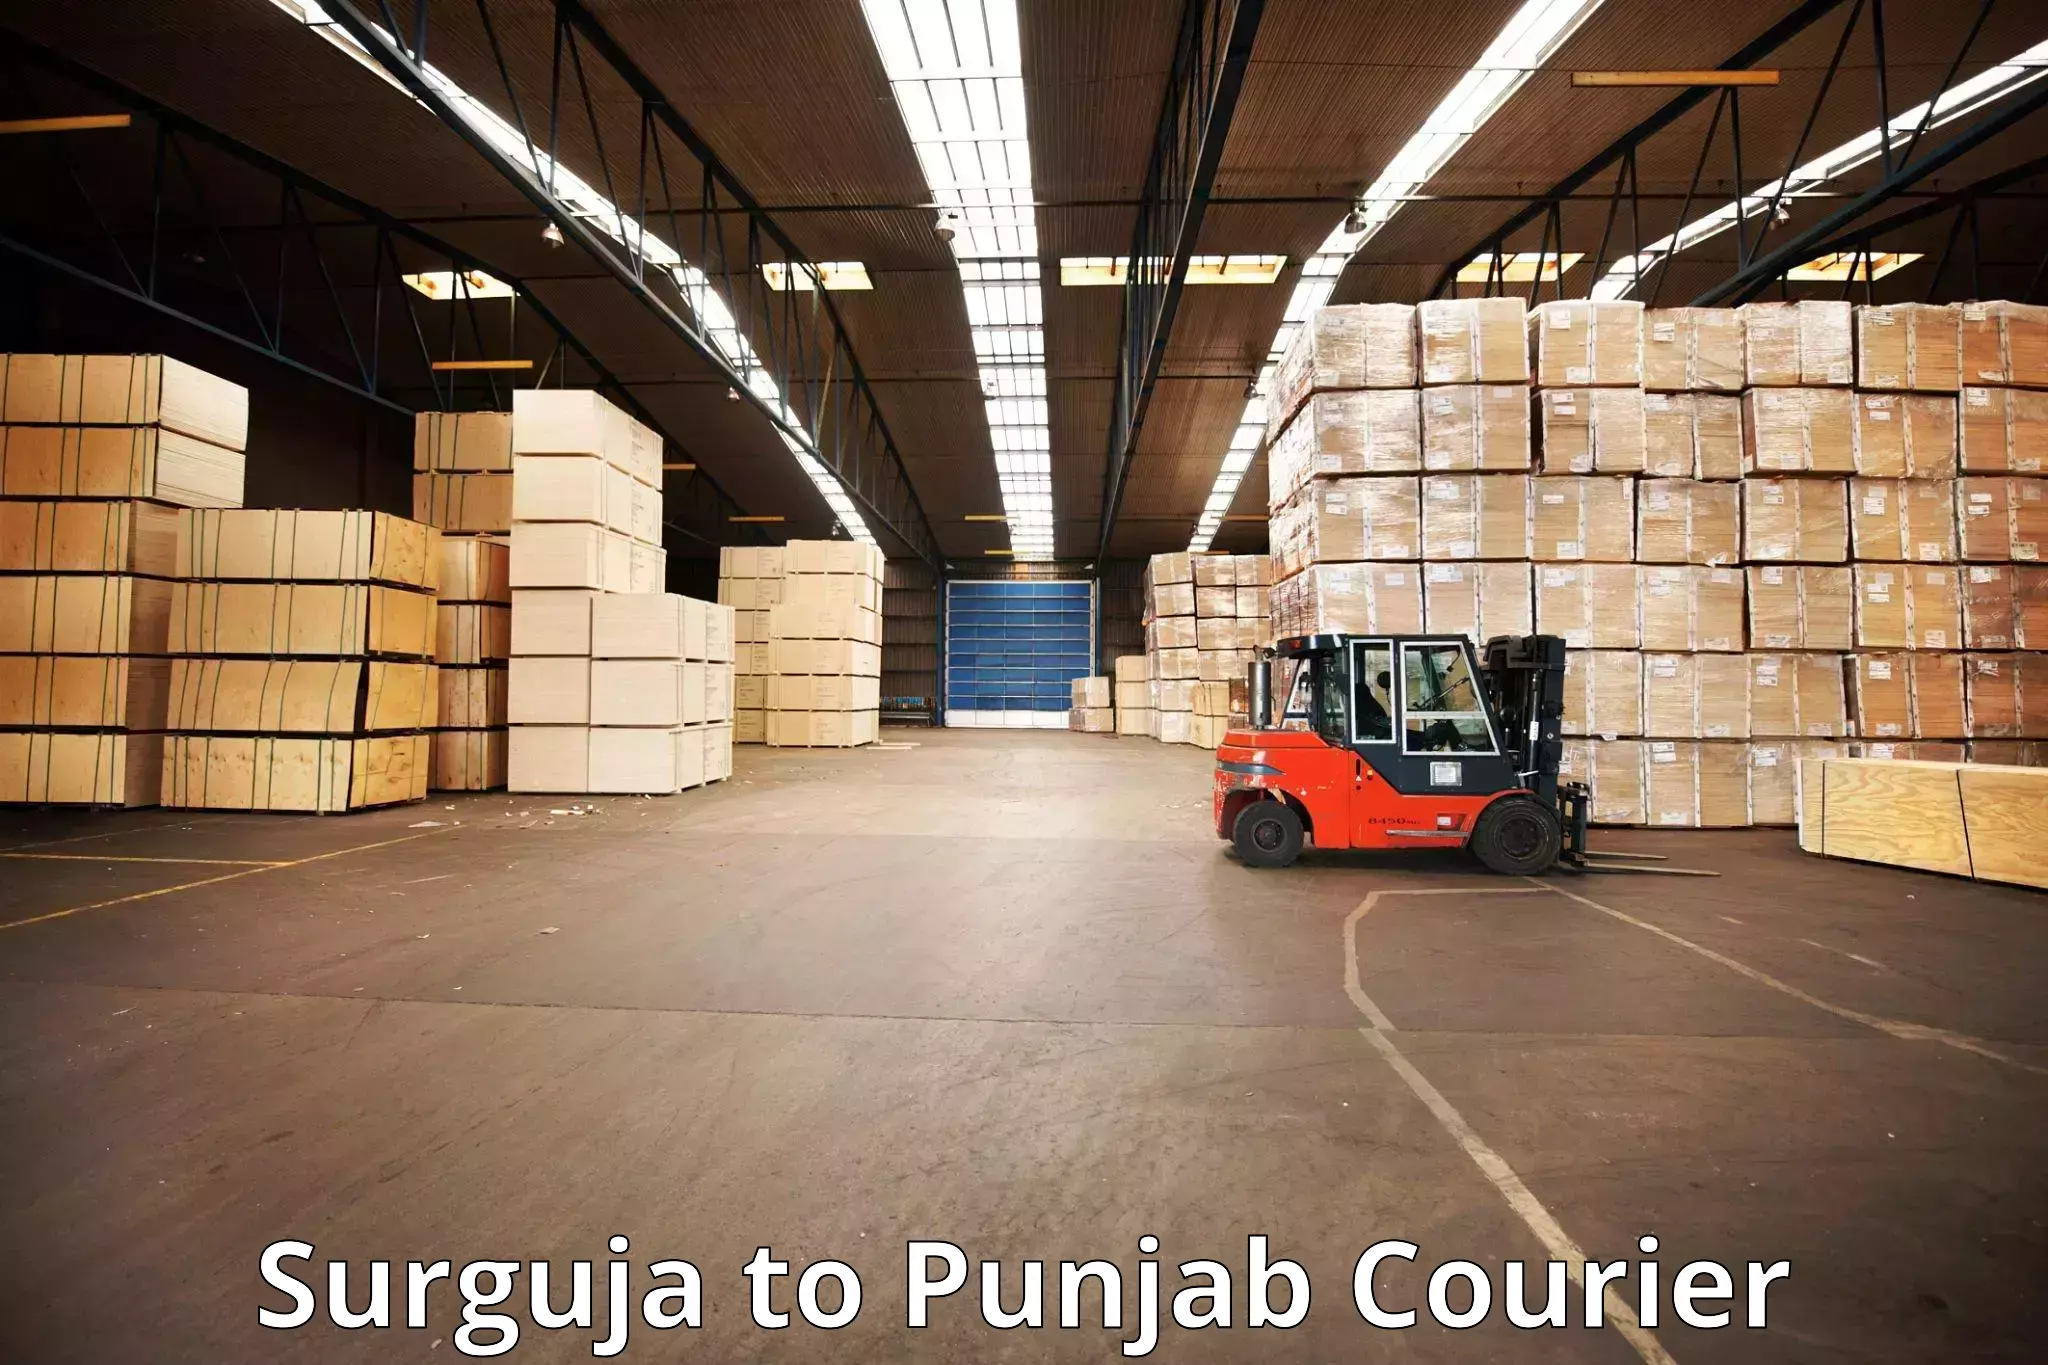 Luggage delivery network Surguja to Central University of Punjab Bathinda